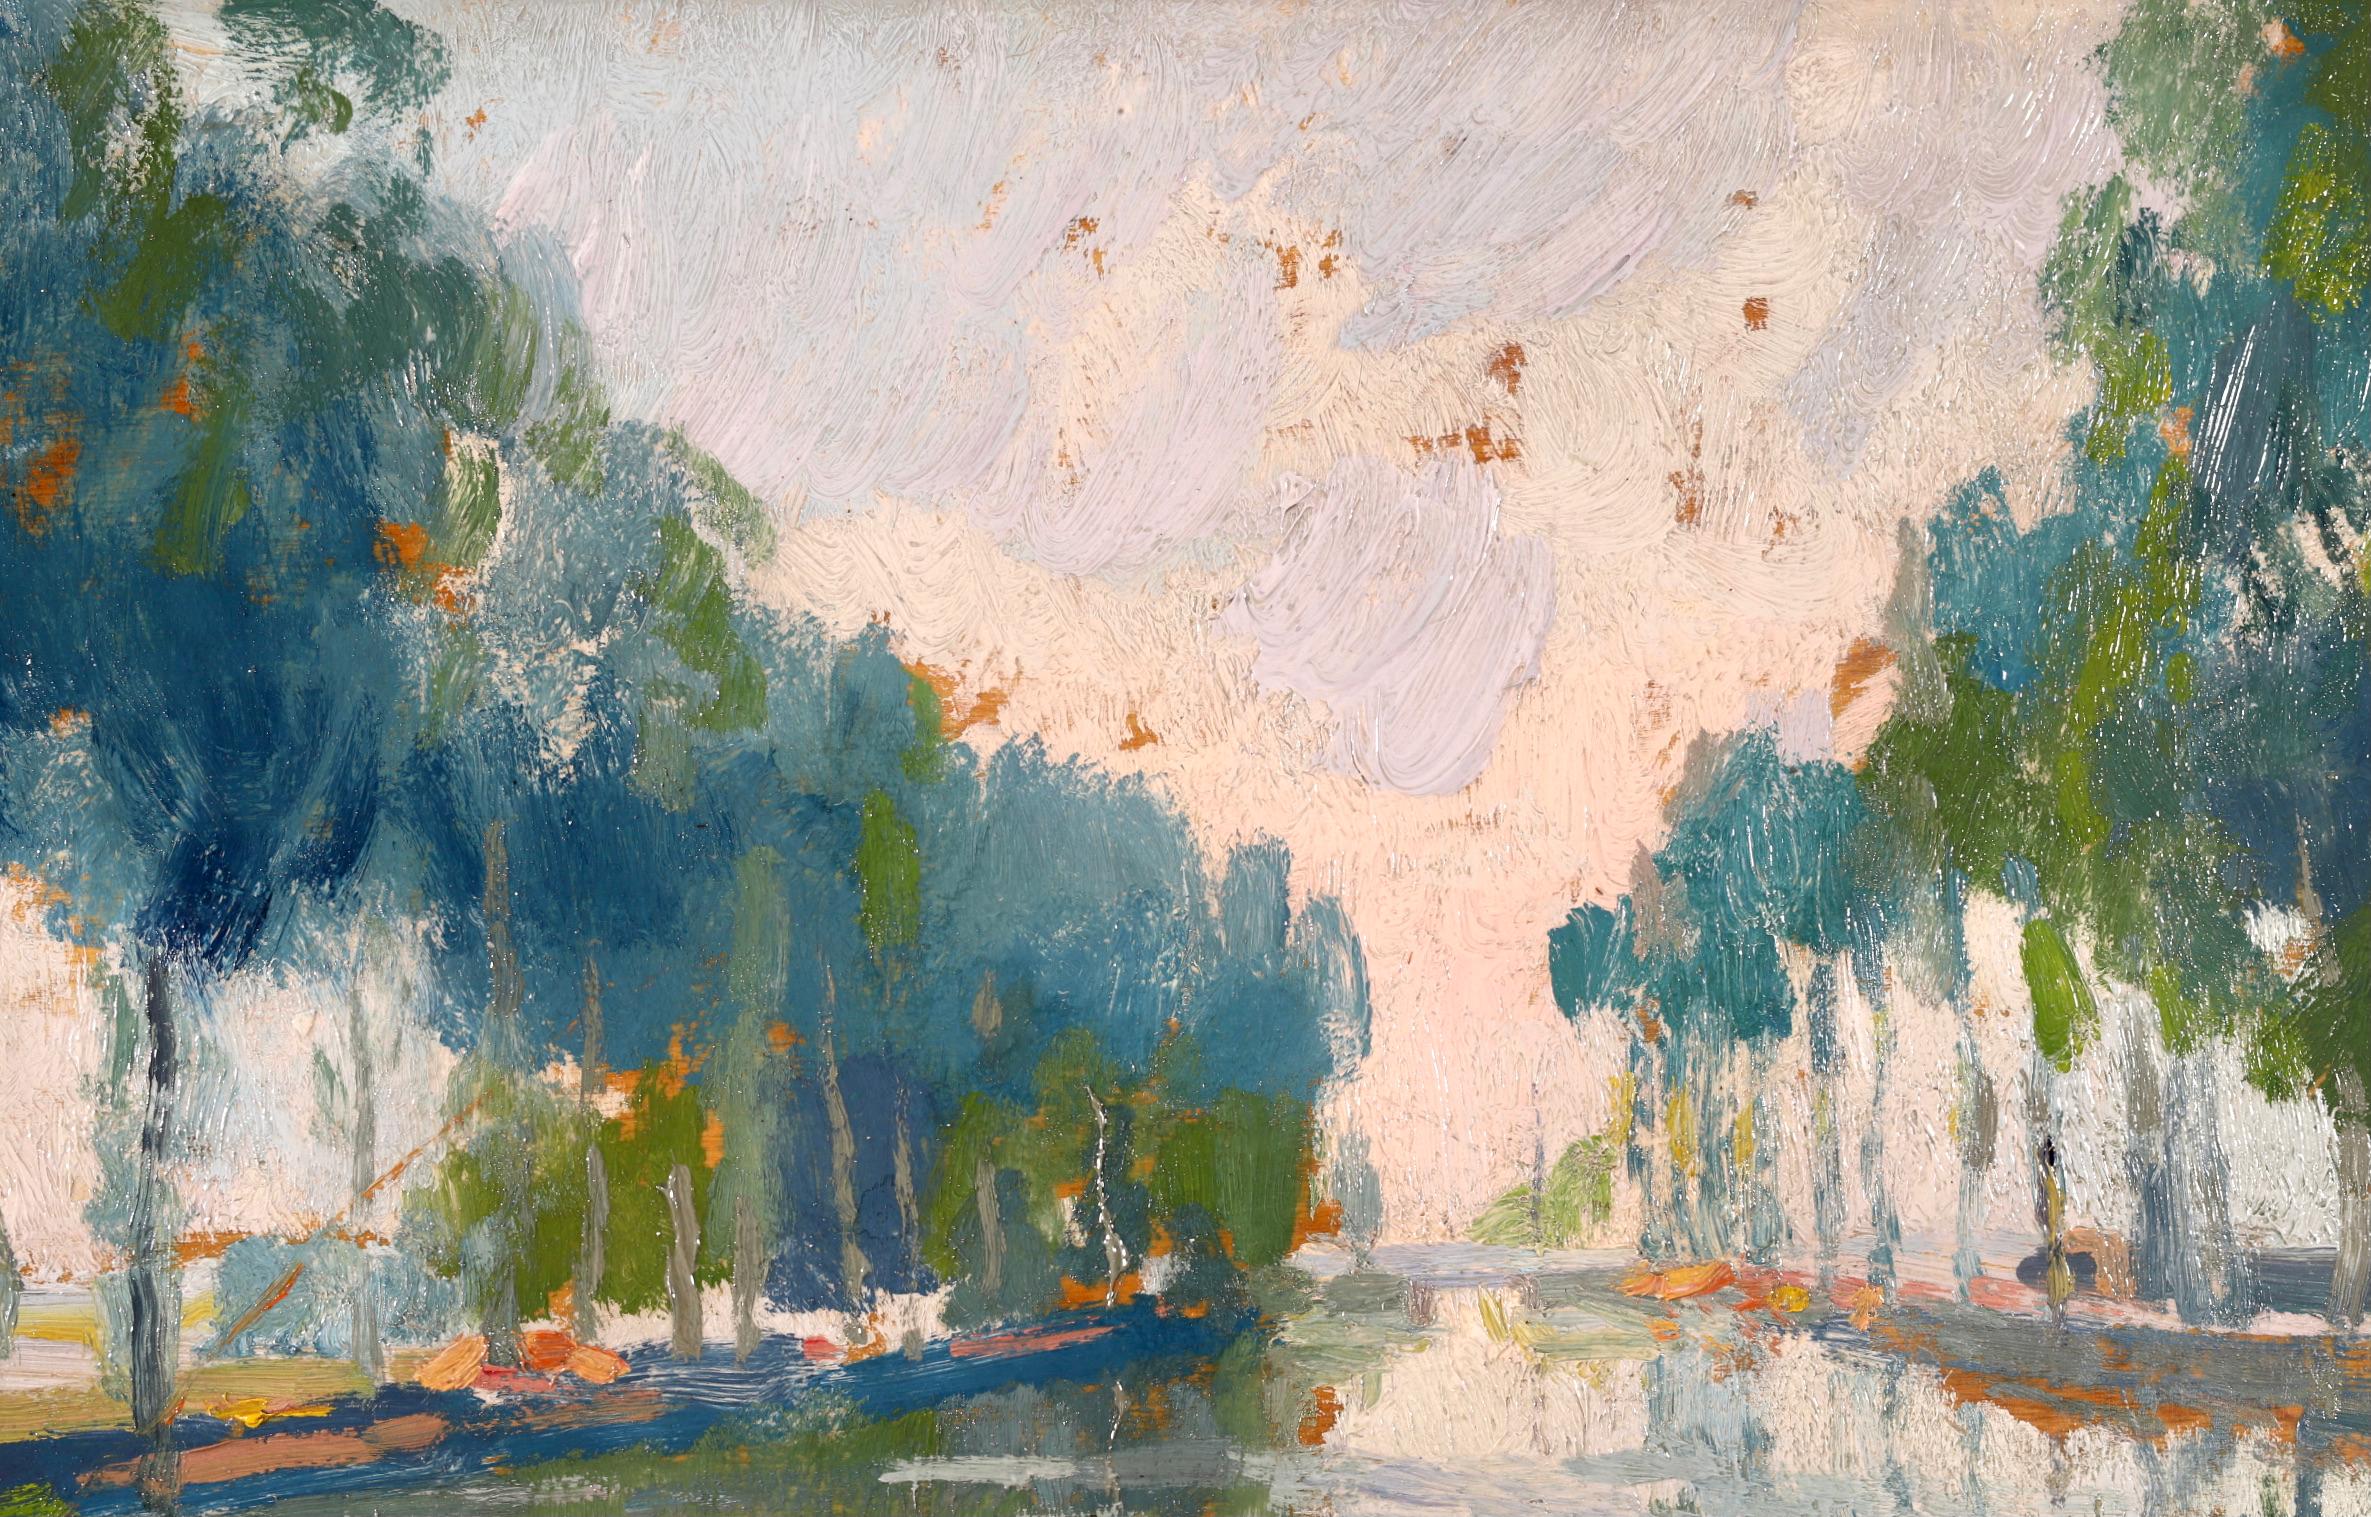 Signed landscape oil on panel circa 1910 by Russian-born post impressionist painter Elie Anatole Pavil. The piece depicts a lone figure fishing on the bank of the River Seine. The artist is looking directly down the tree-lined river on a bright